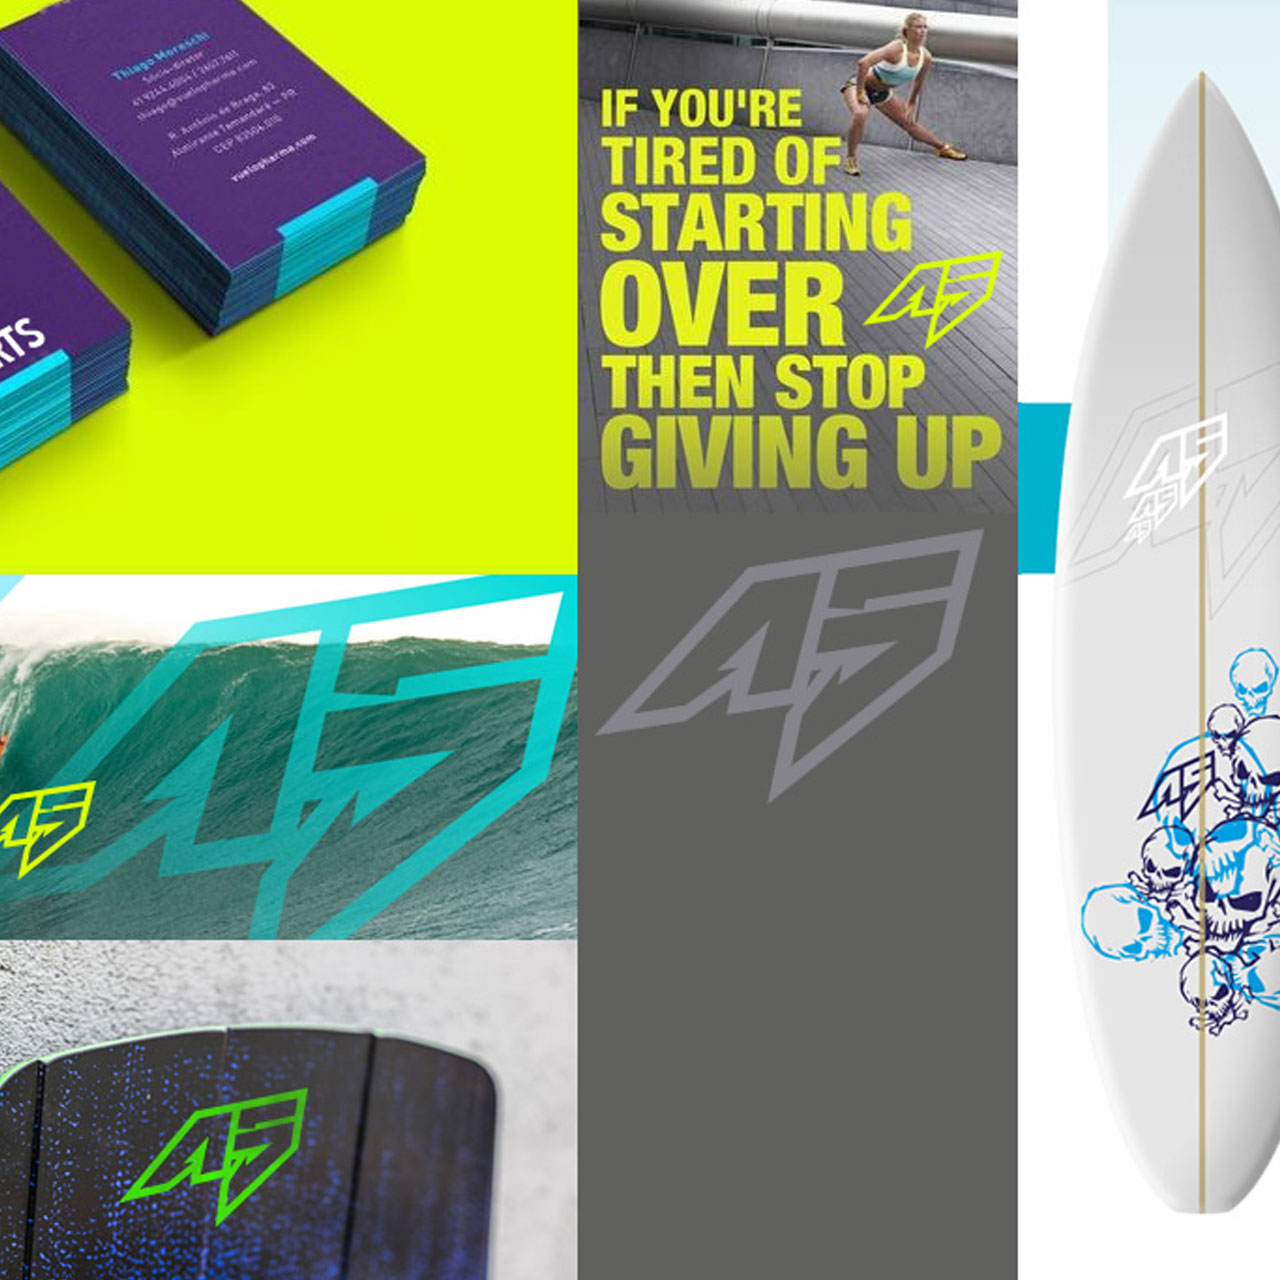 Visual branding guidelines from A5Sport: TVH Design provides a distinctive branding